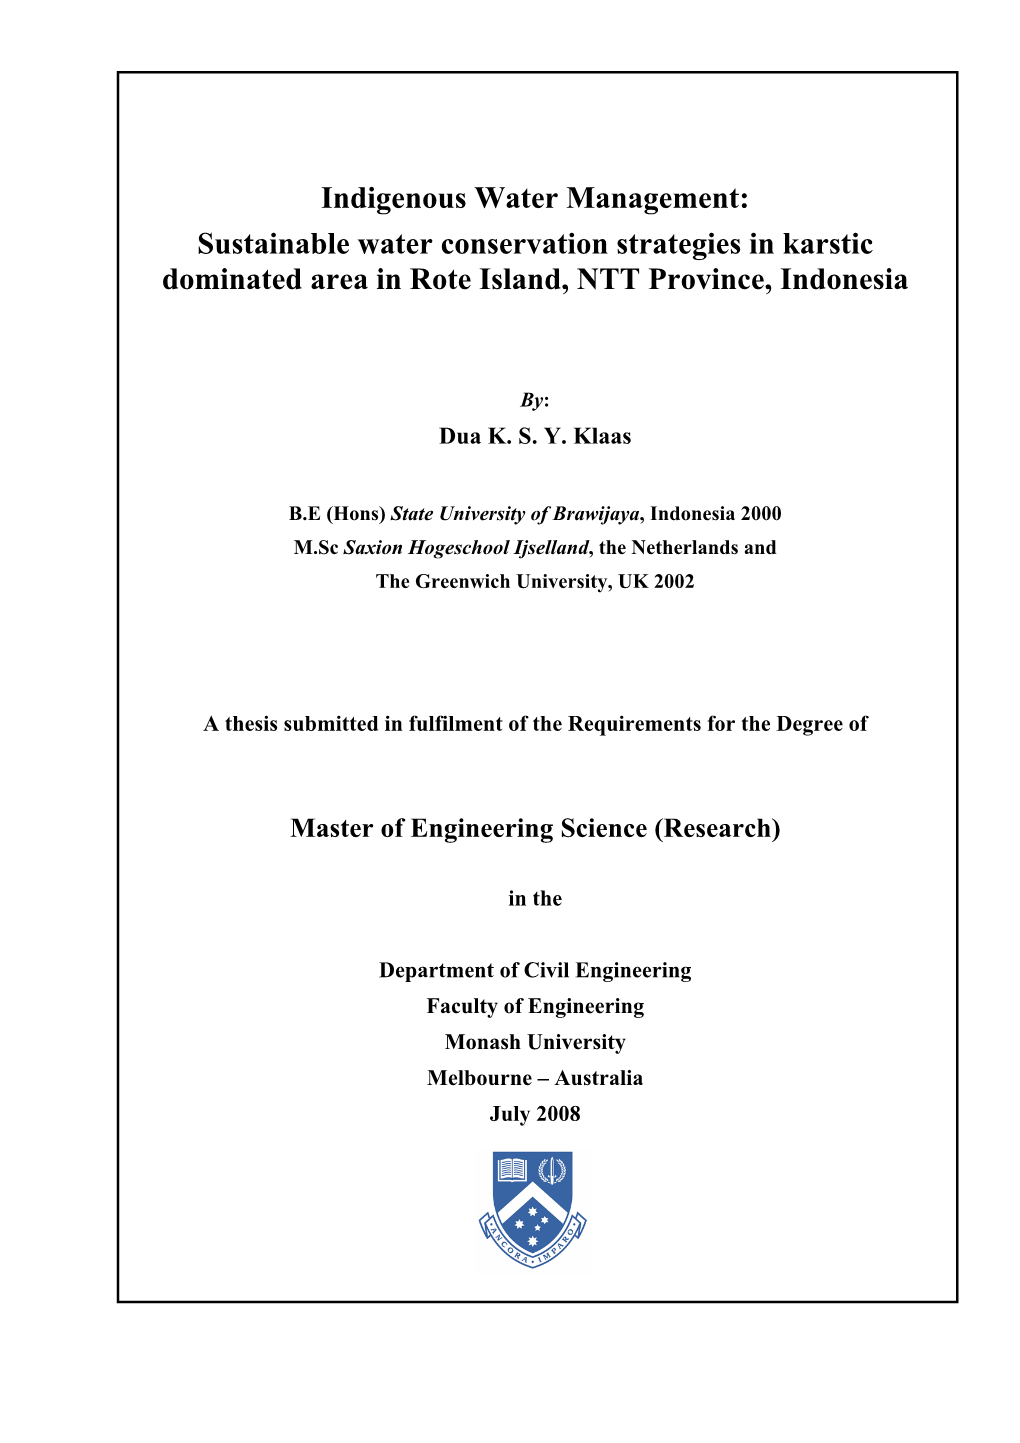 Sustainable Water Conservation Strategies in Karstic Dominated Area in Rote Island, NTT Province, Indonesia